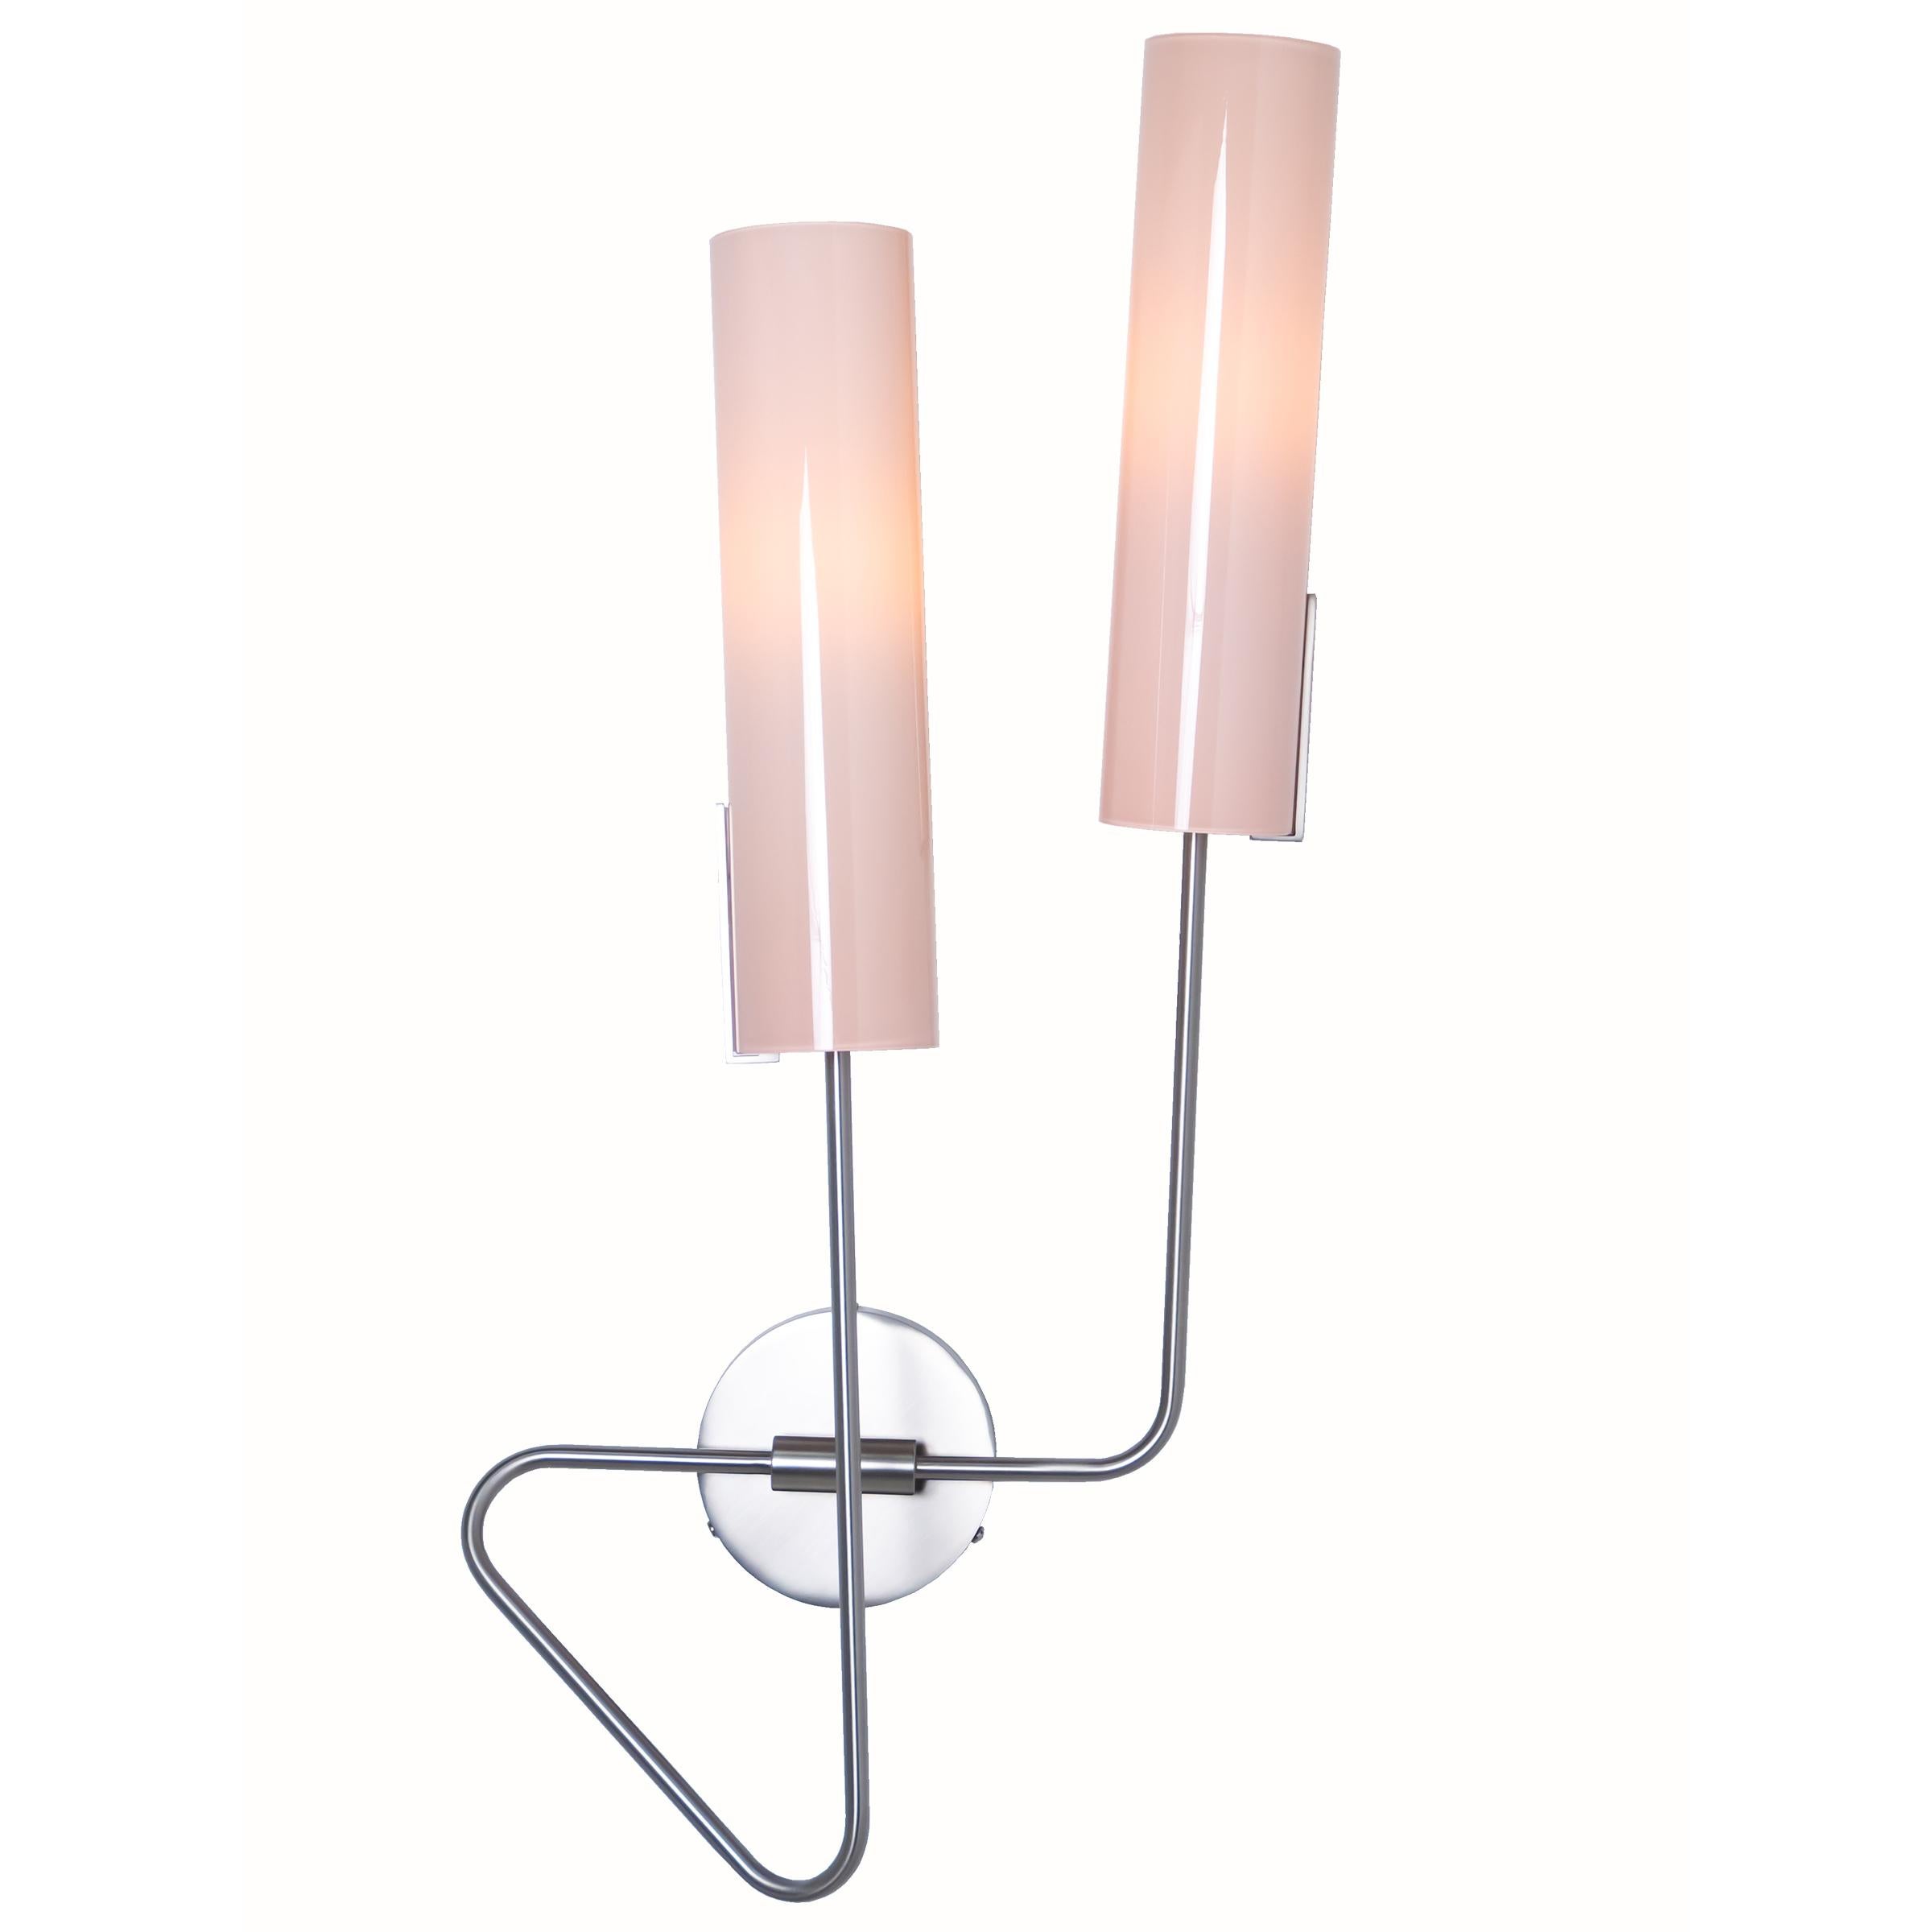 Continuum 01 Sconce: Satin Nickel/Charcoal Ombre Shades by Avram Rusu Studio For Sale 2